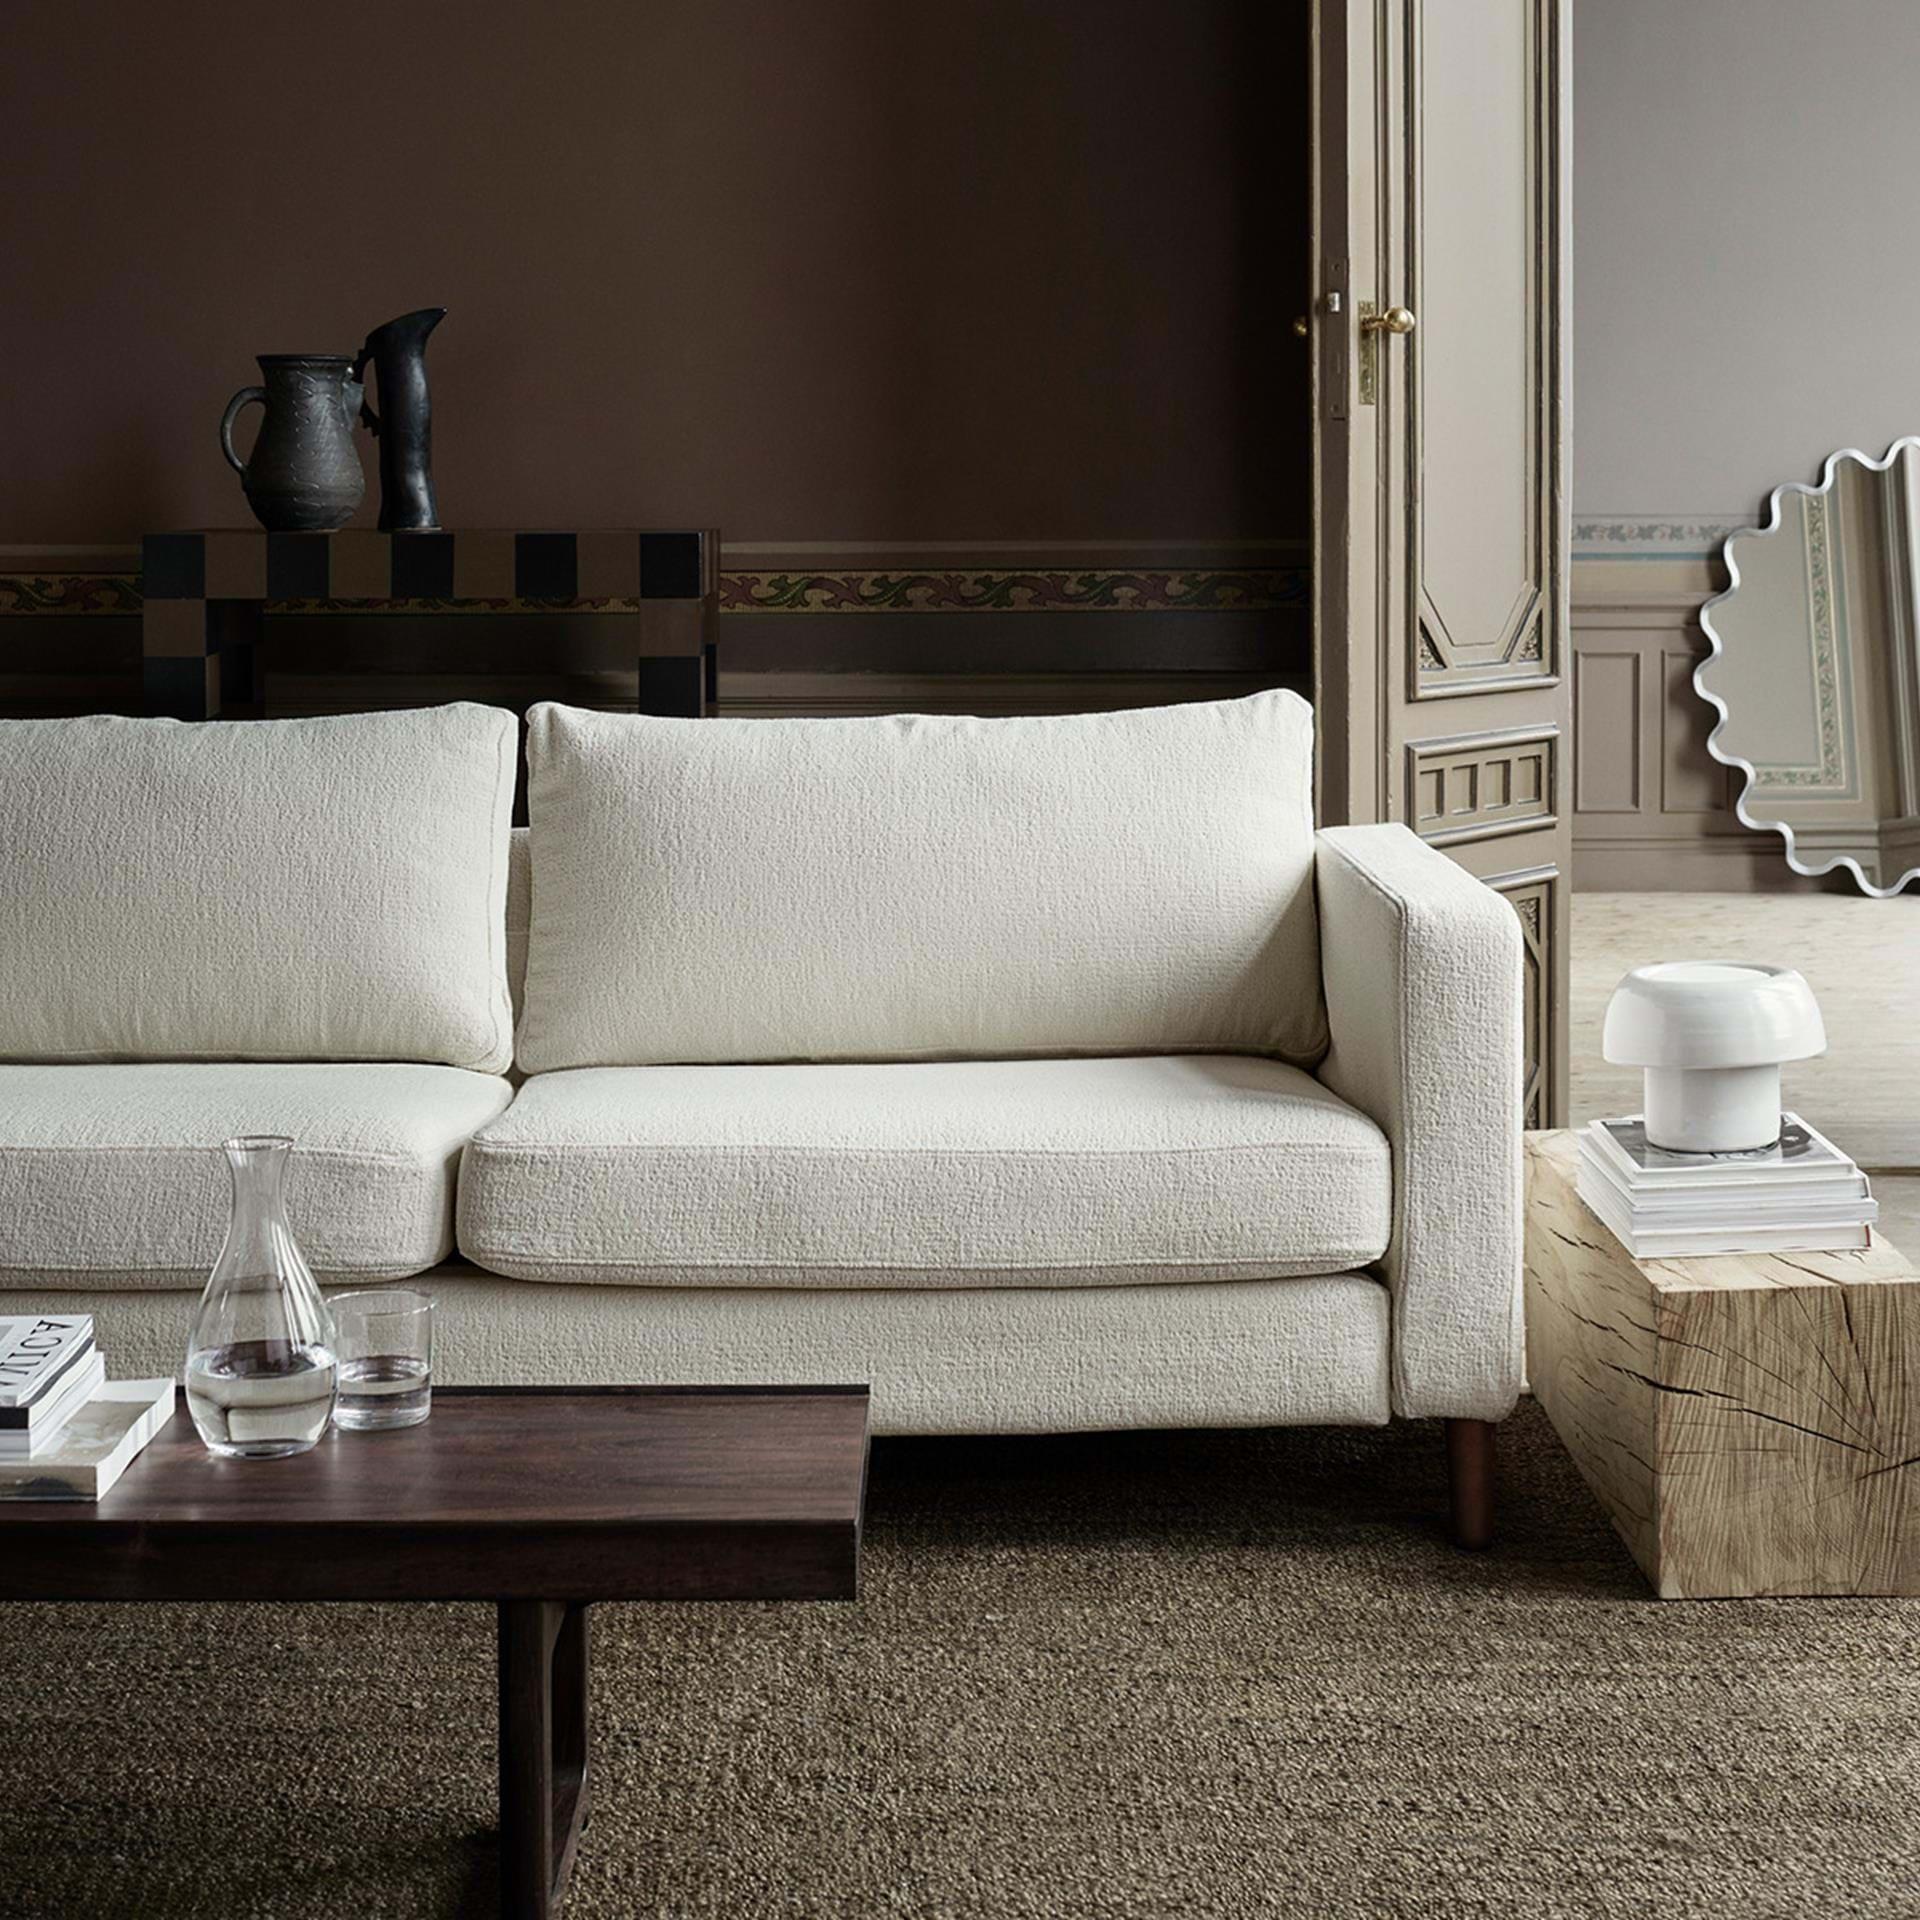 Treat your sofa to a winter make over with 20% off.